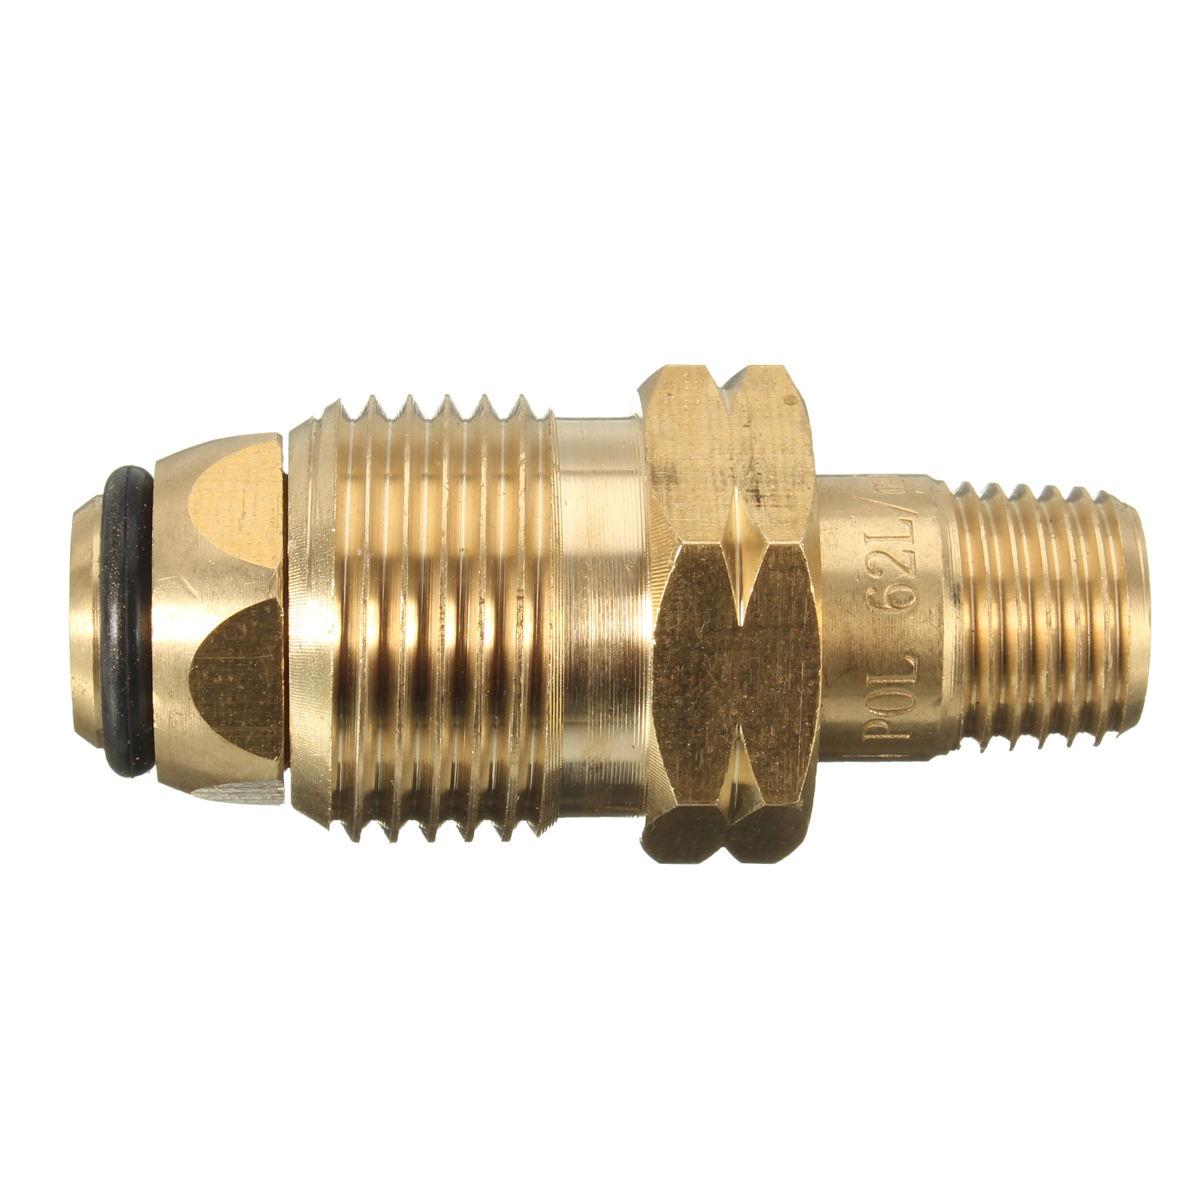 Brass-6mm-Propane-LP-Gas-Cylinder-Fitting-POL-Connector-1065053